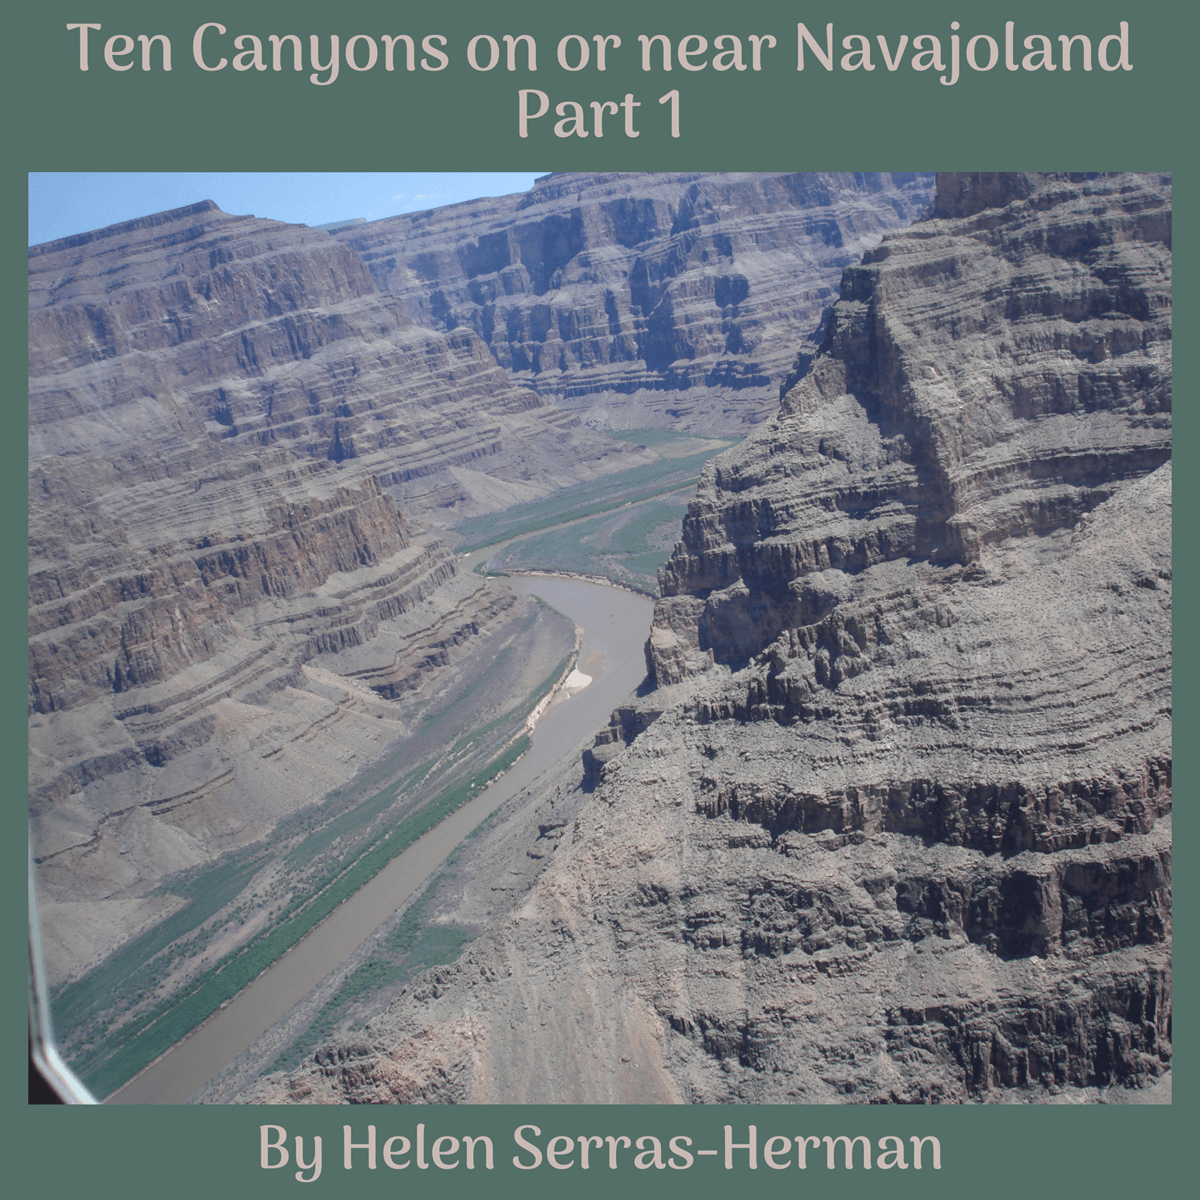 Ten Canyons on or near Navajoland - Part 1